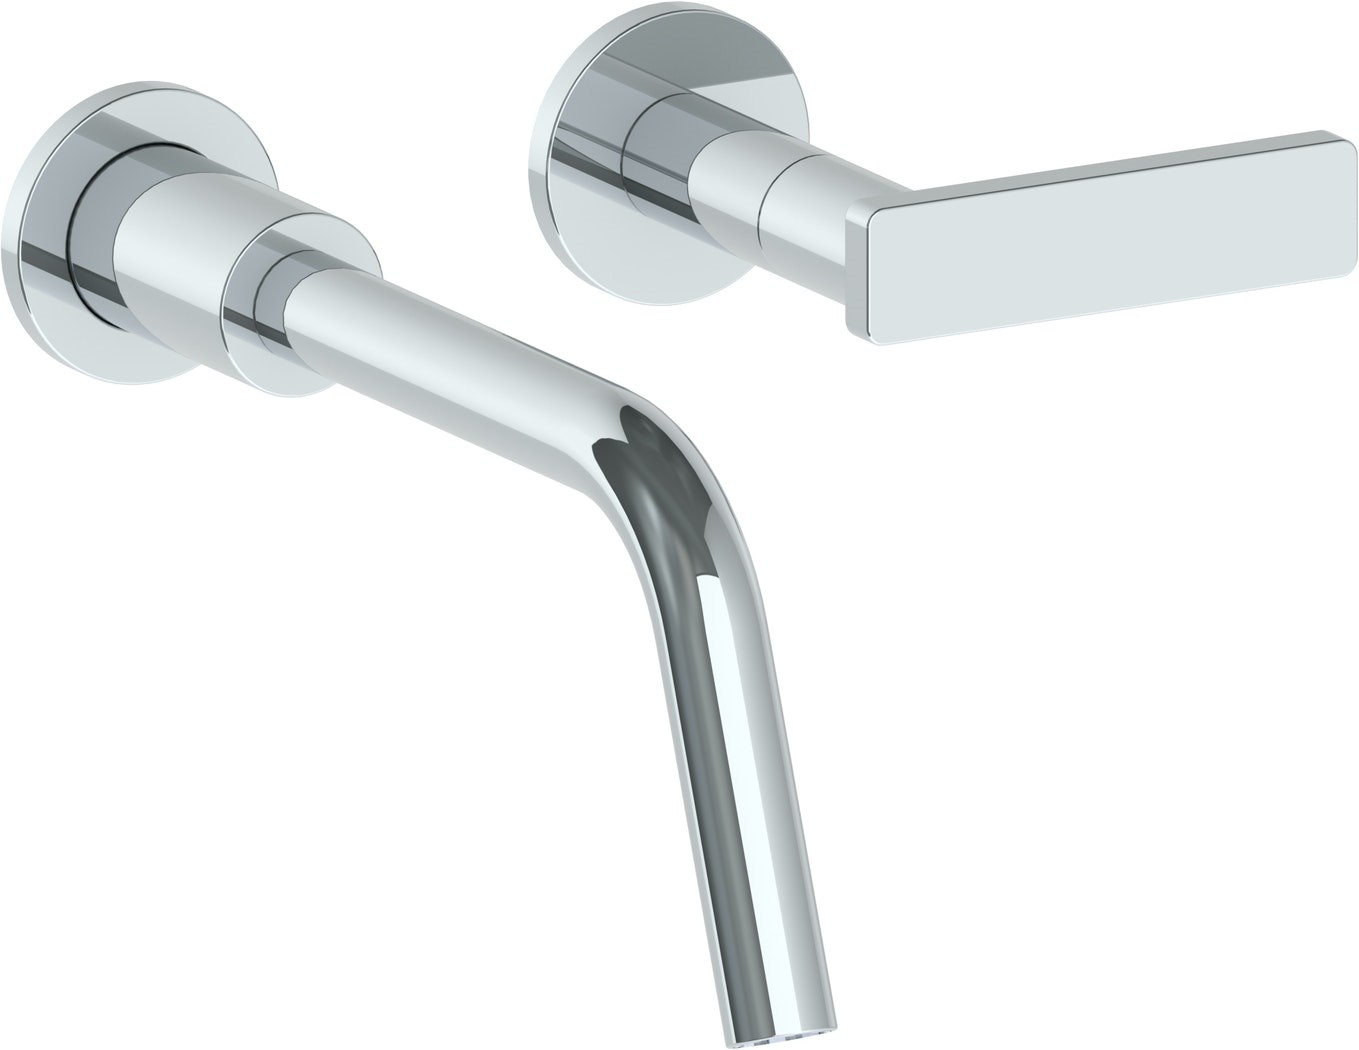 WATERMARK 70-1.2 RAINEY TWO HOLES WALL MOUNT BATHROOM FAUCET WITH 8 1/2 INCH SPOUT REACH